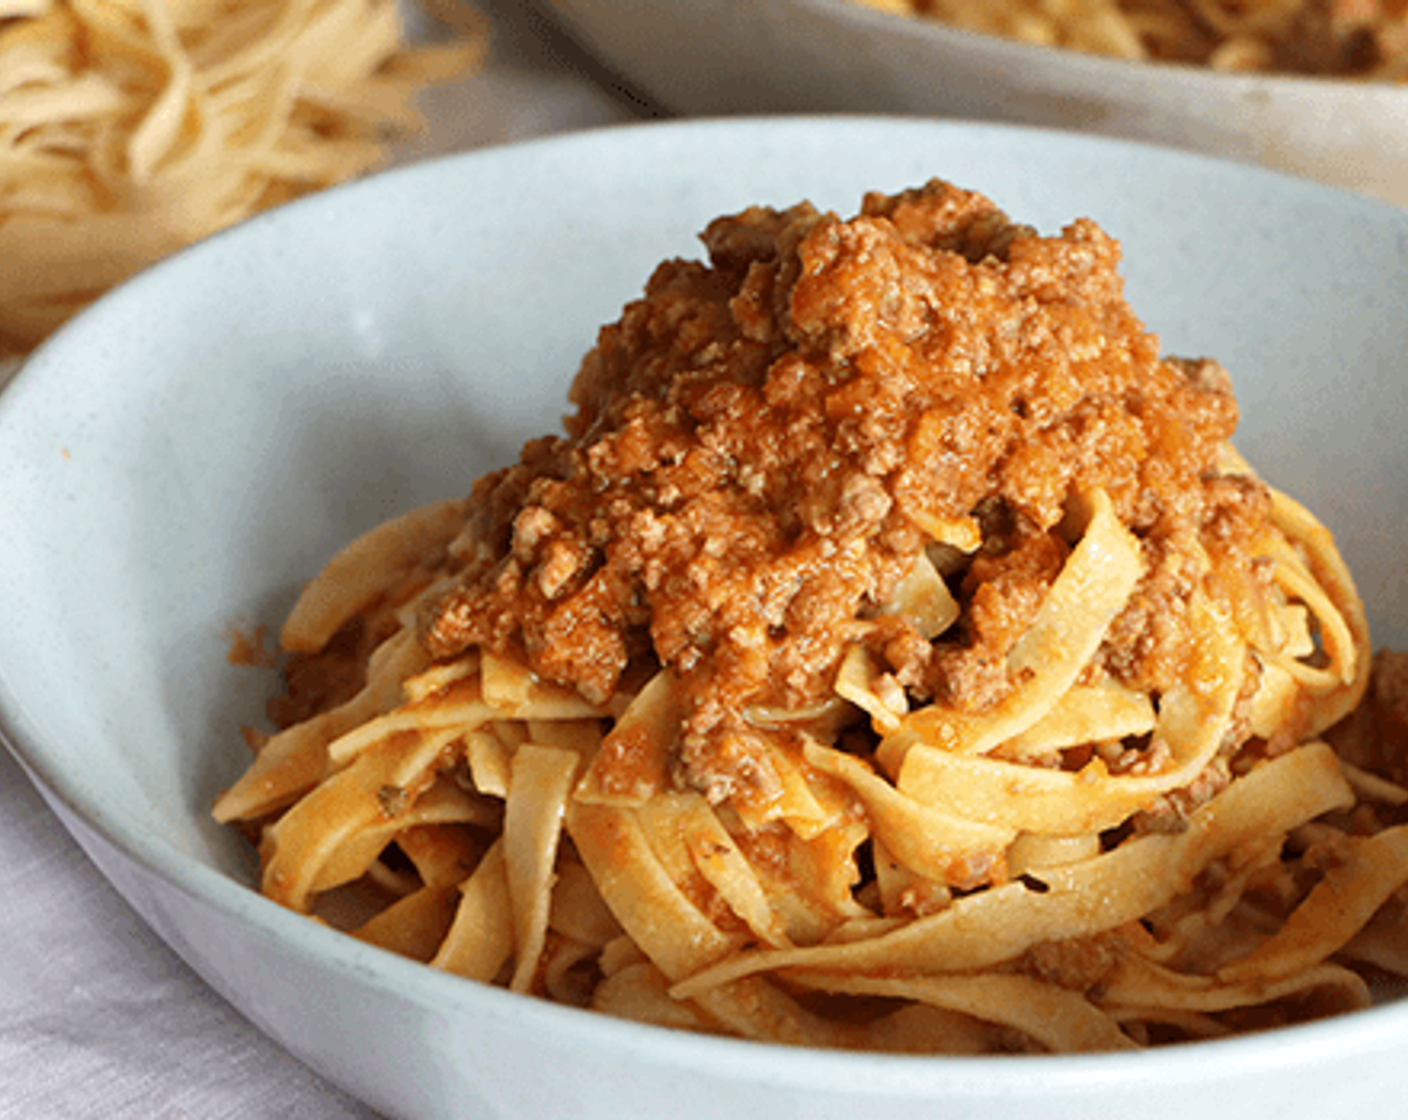 step 16 Serve the Bolognese sauce pasta can be served on a plate or in a bowl – either way, you’ll likely add some extra sauce! You can also add a sprinkle of Parmigiano or Pecorino cheese to the top for some added salty goodness.